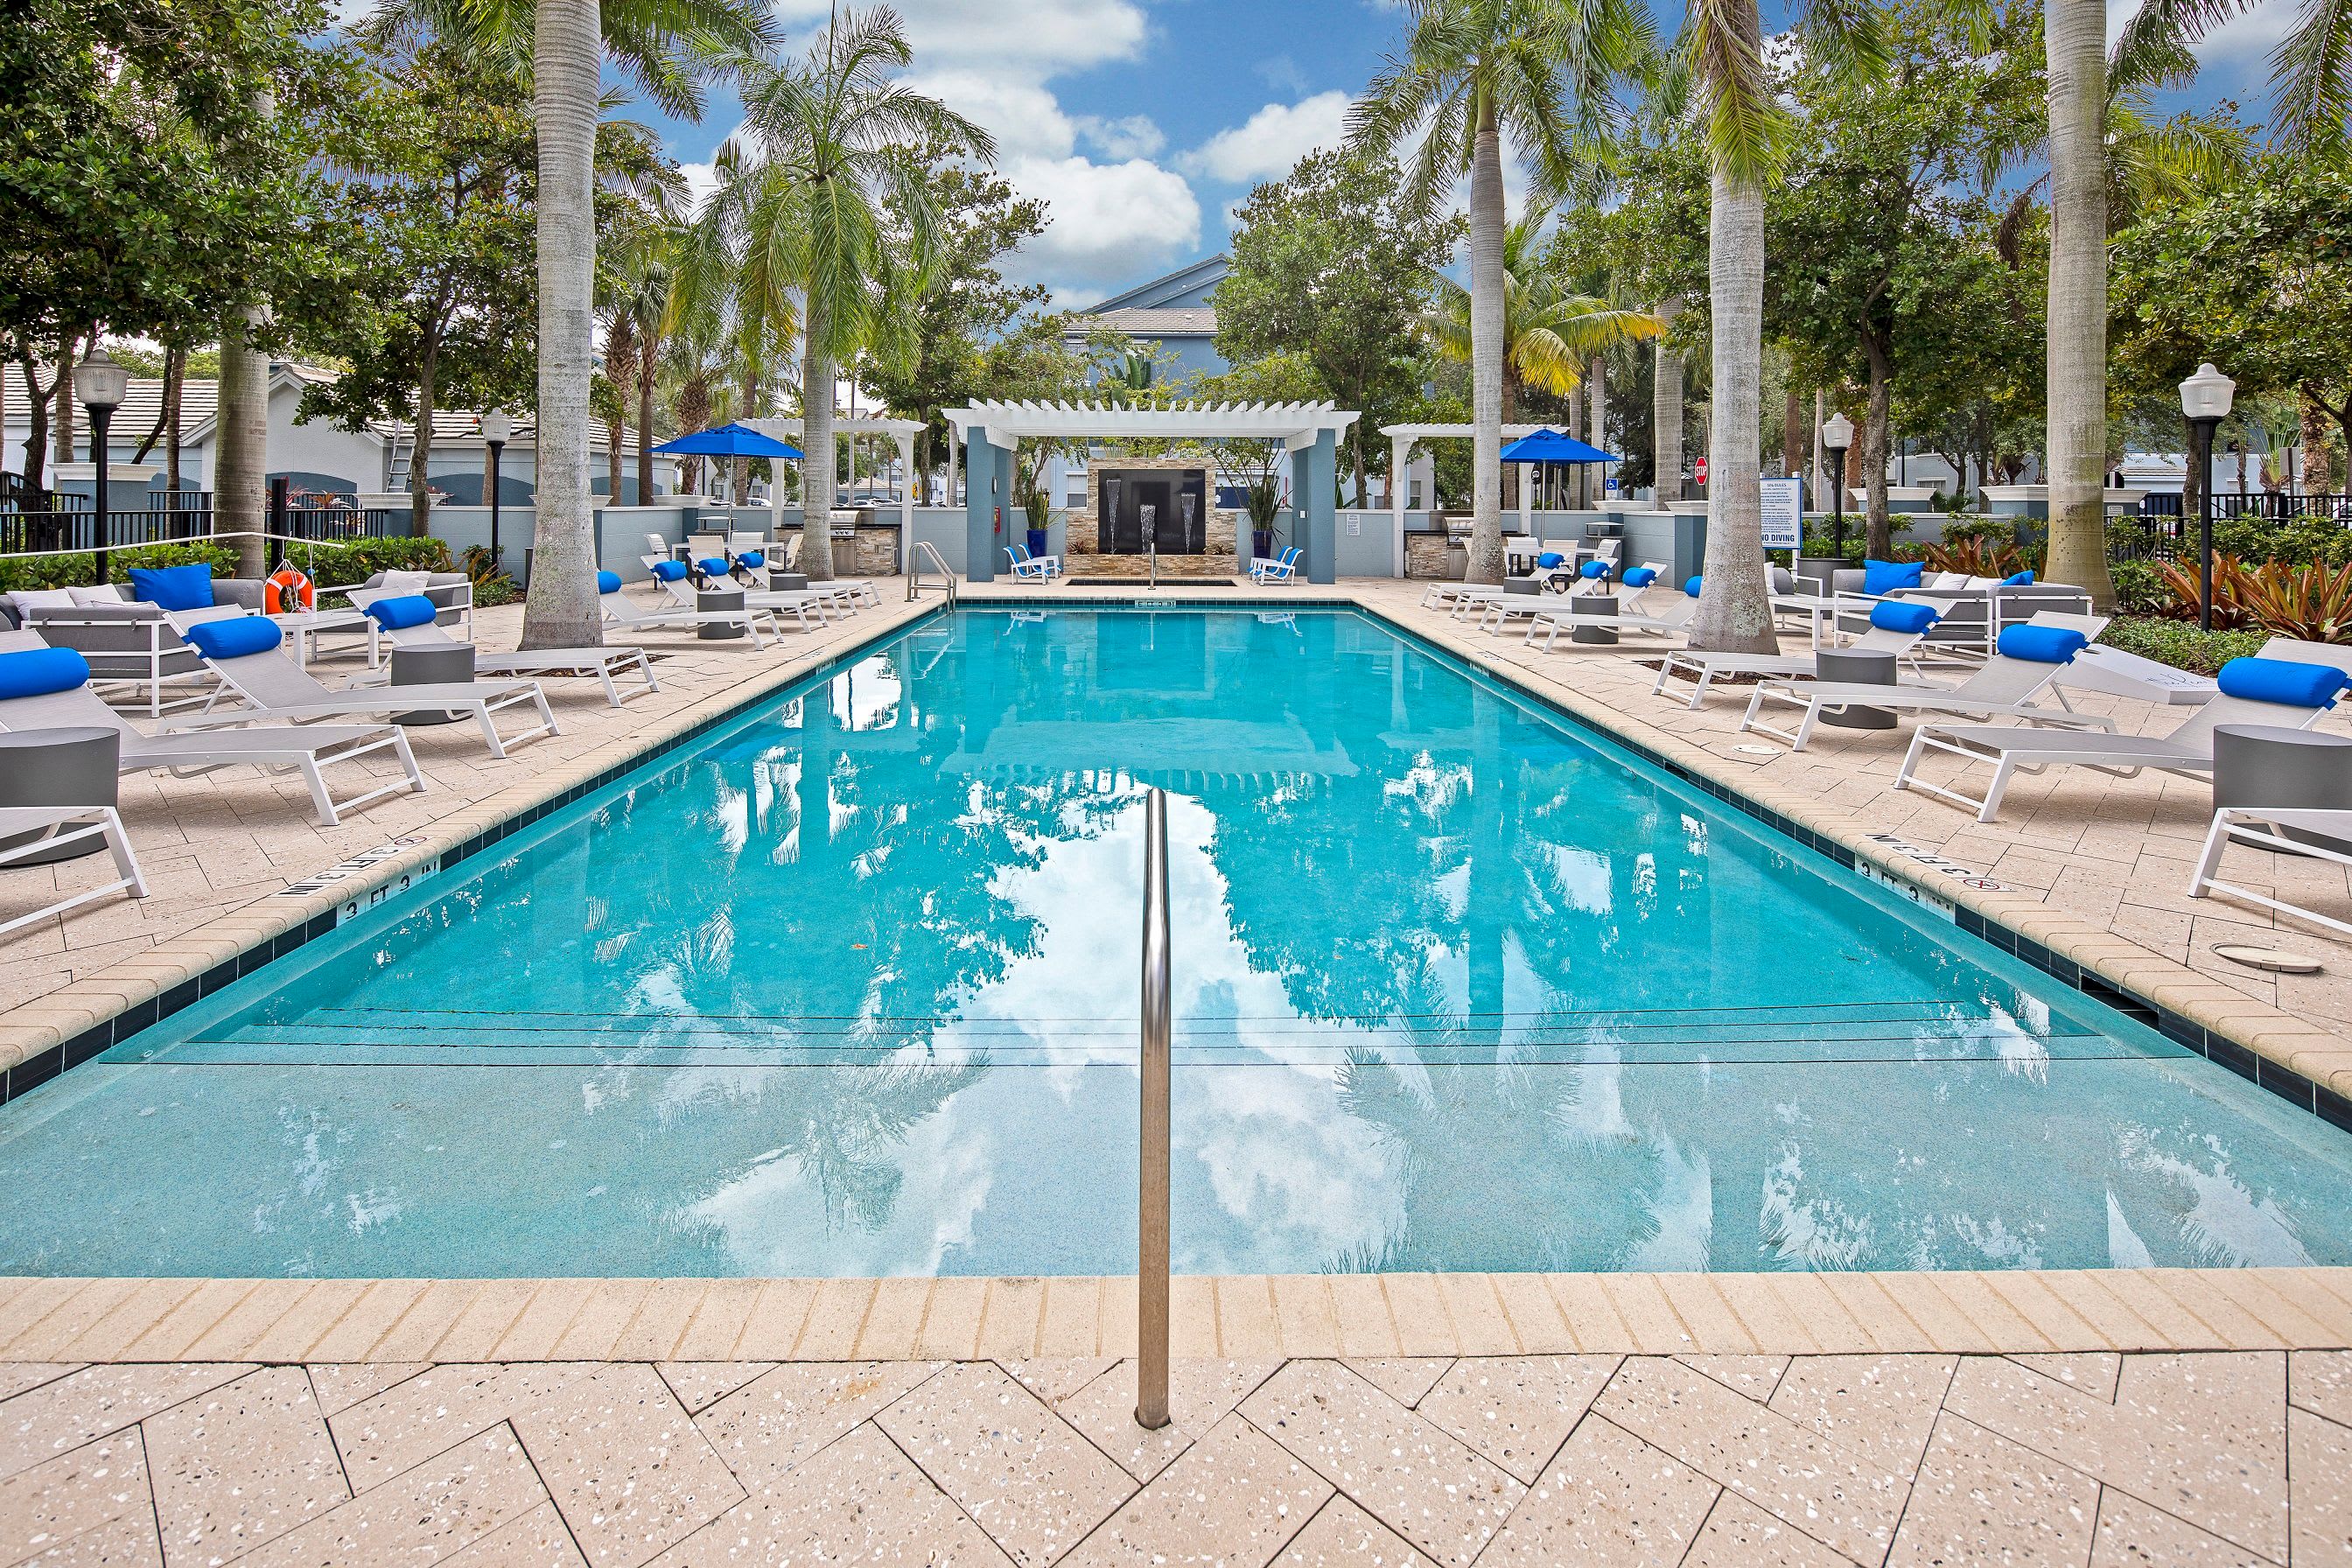  Resort style swimming pool surrounded by palm trees at The Pearl in Ft Lauderdale, Florida